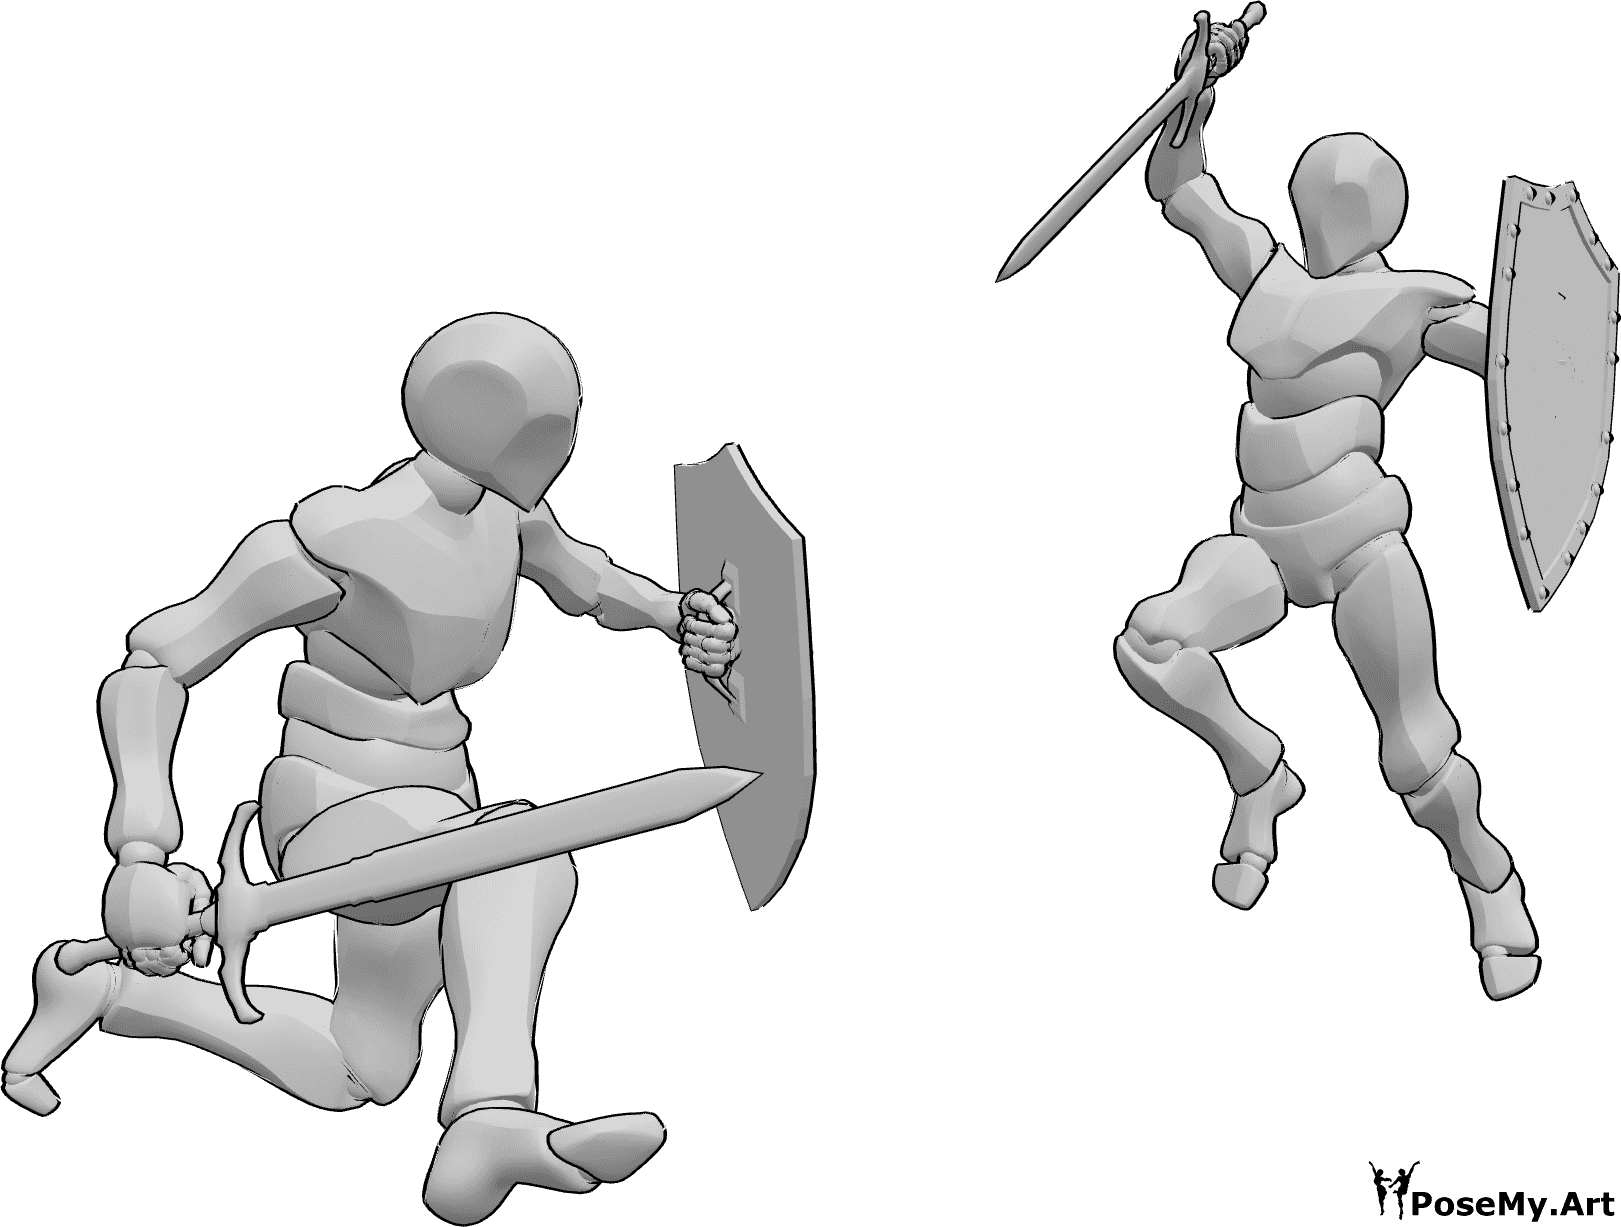 Pose Reference- Sword shield fighting pose - Two males are fighting, holding swords and shields, attacking pose